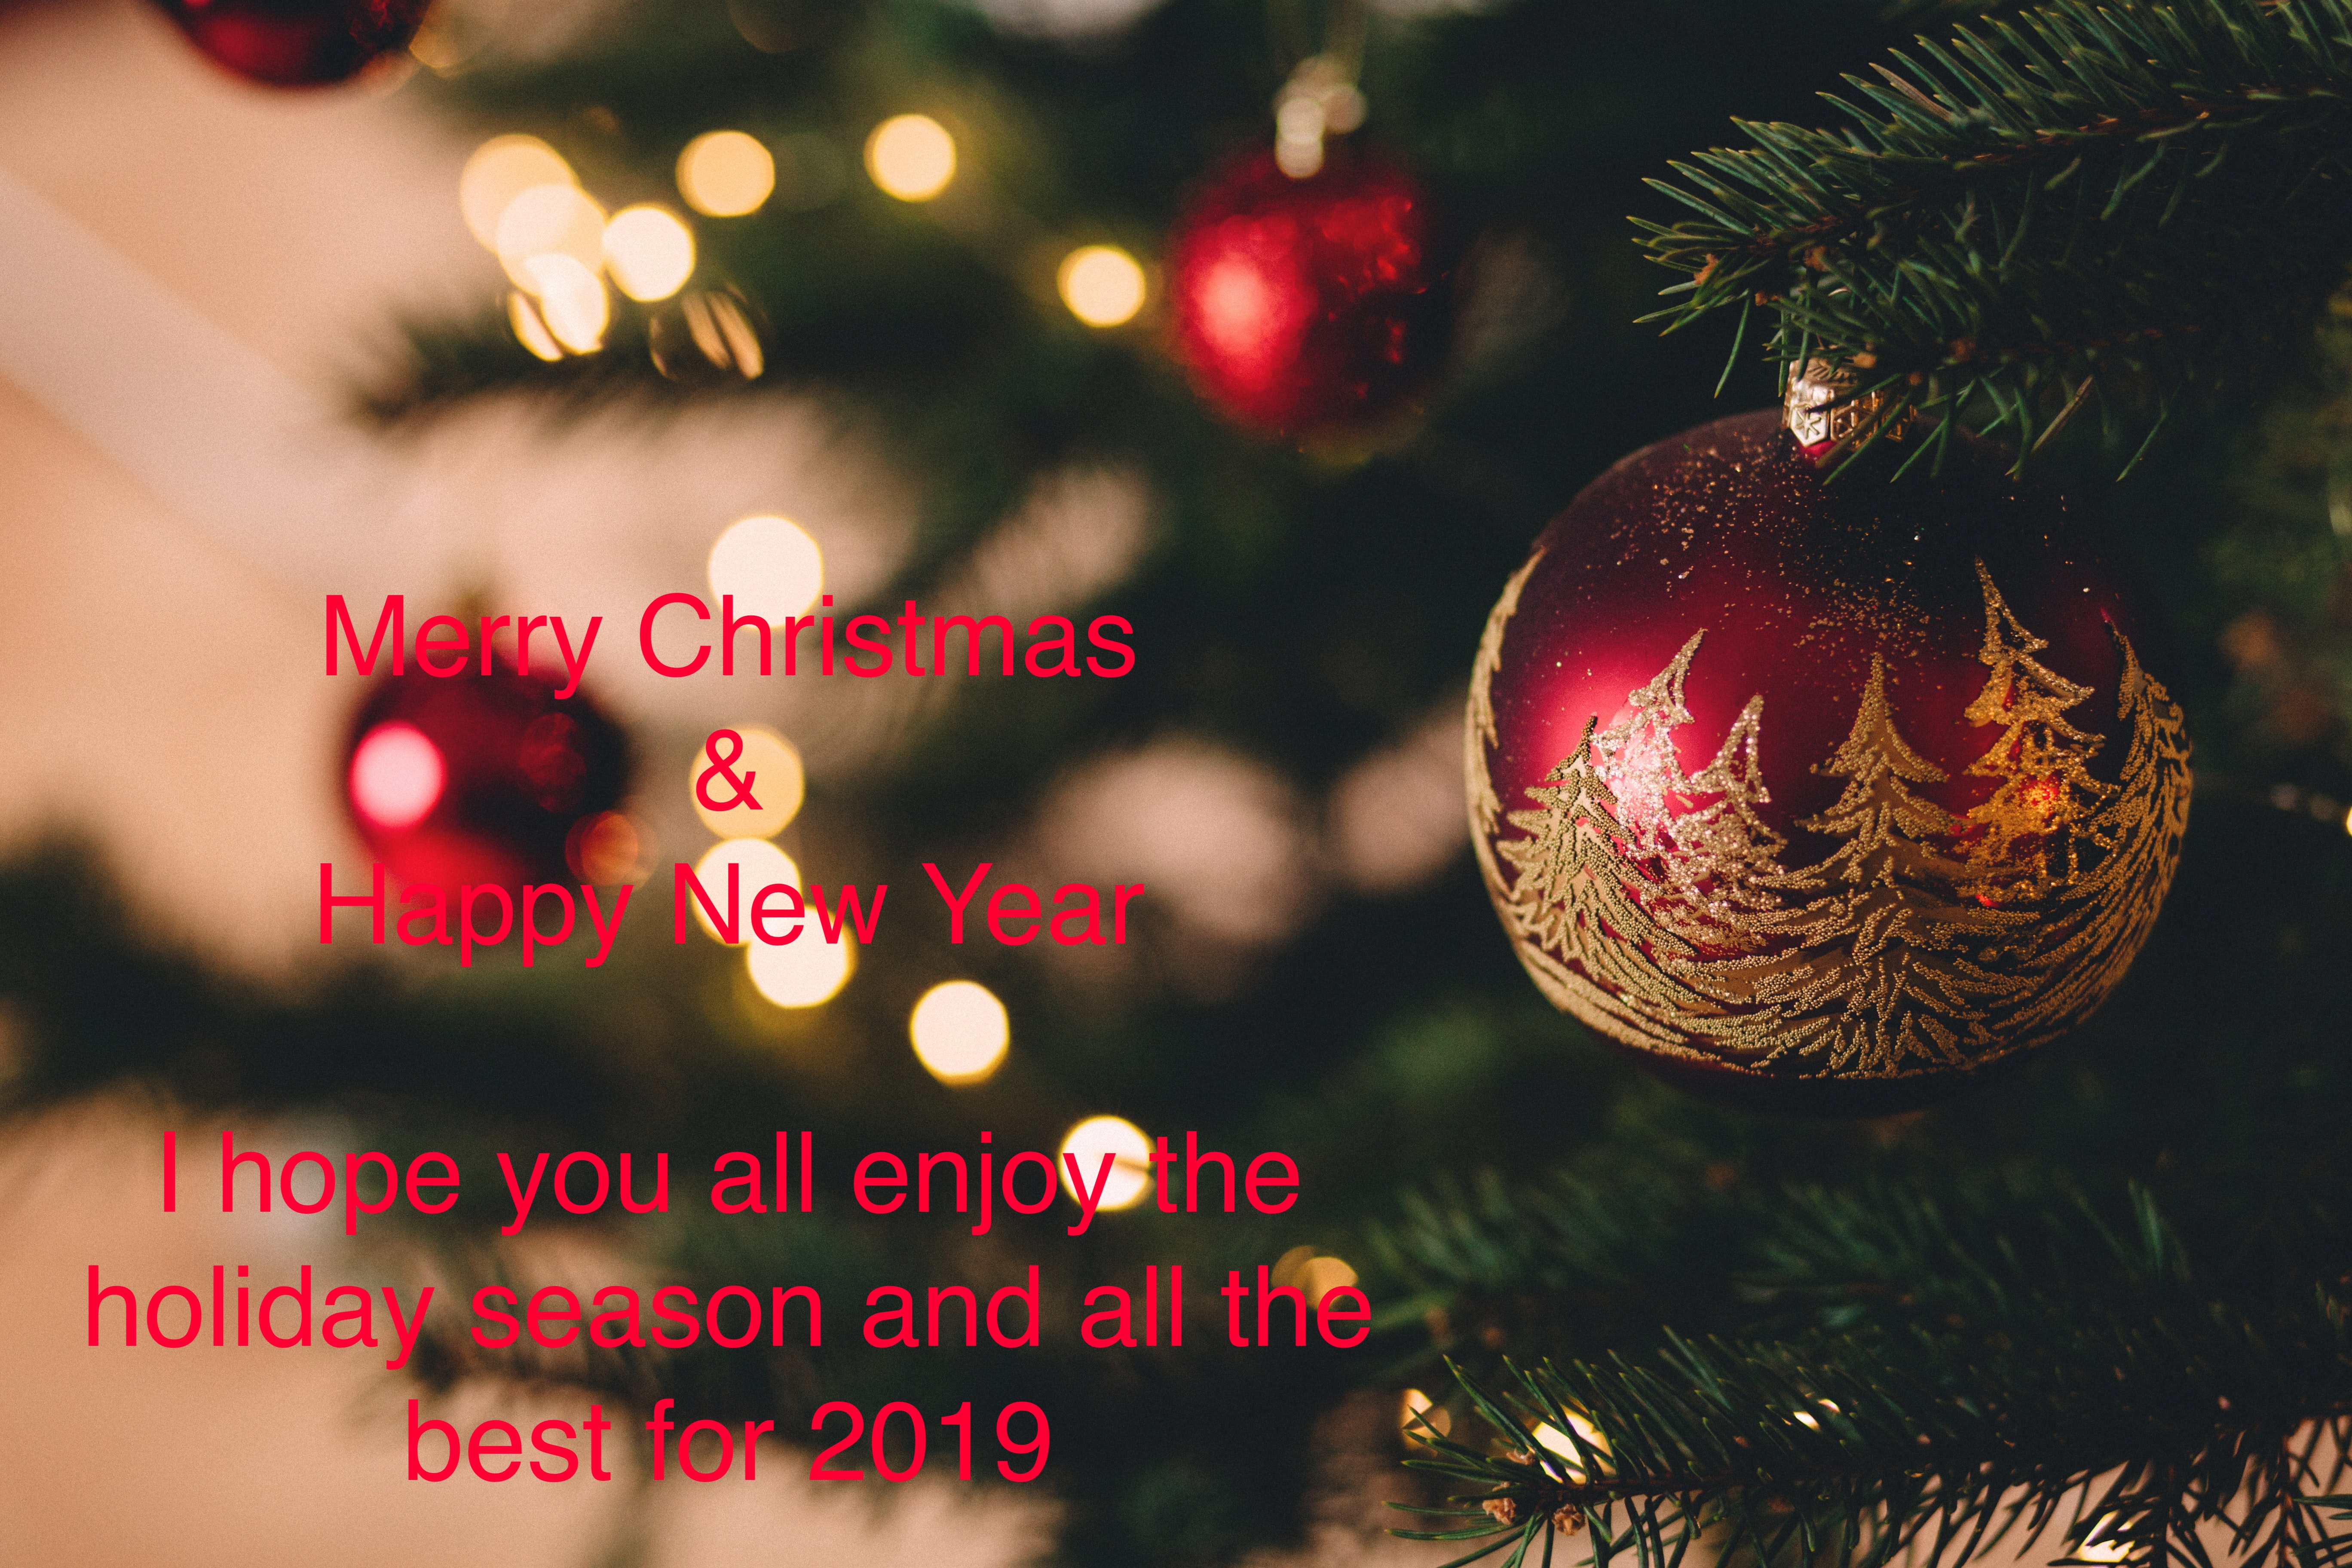 Merry Christmas from Hilsden Trading